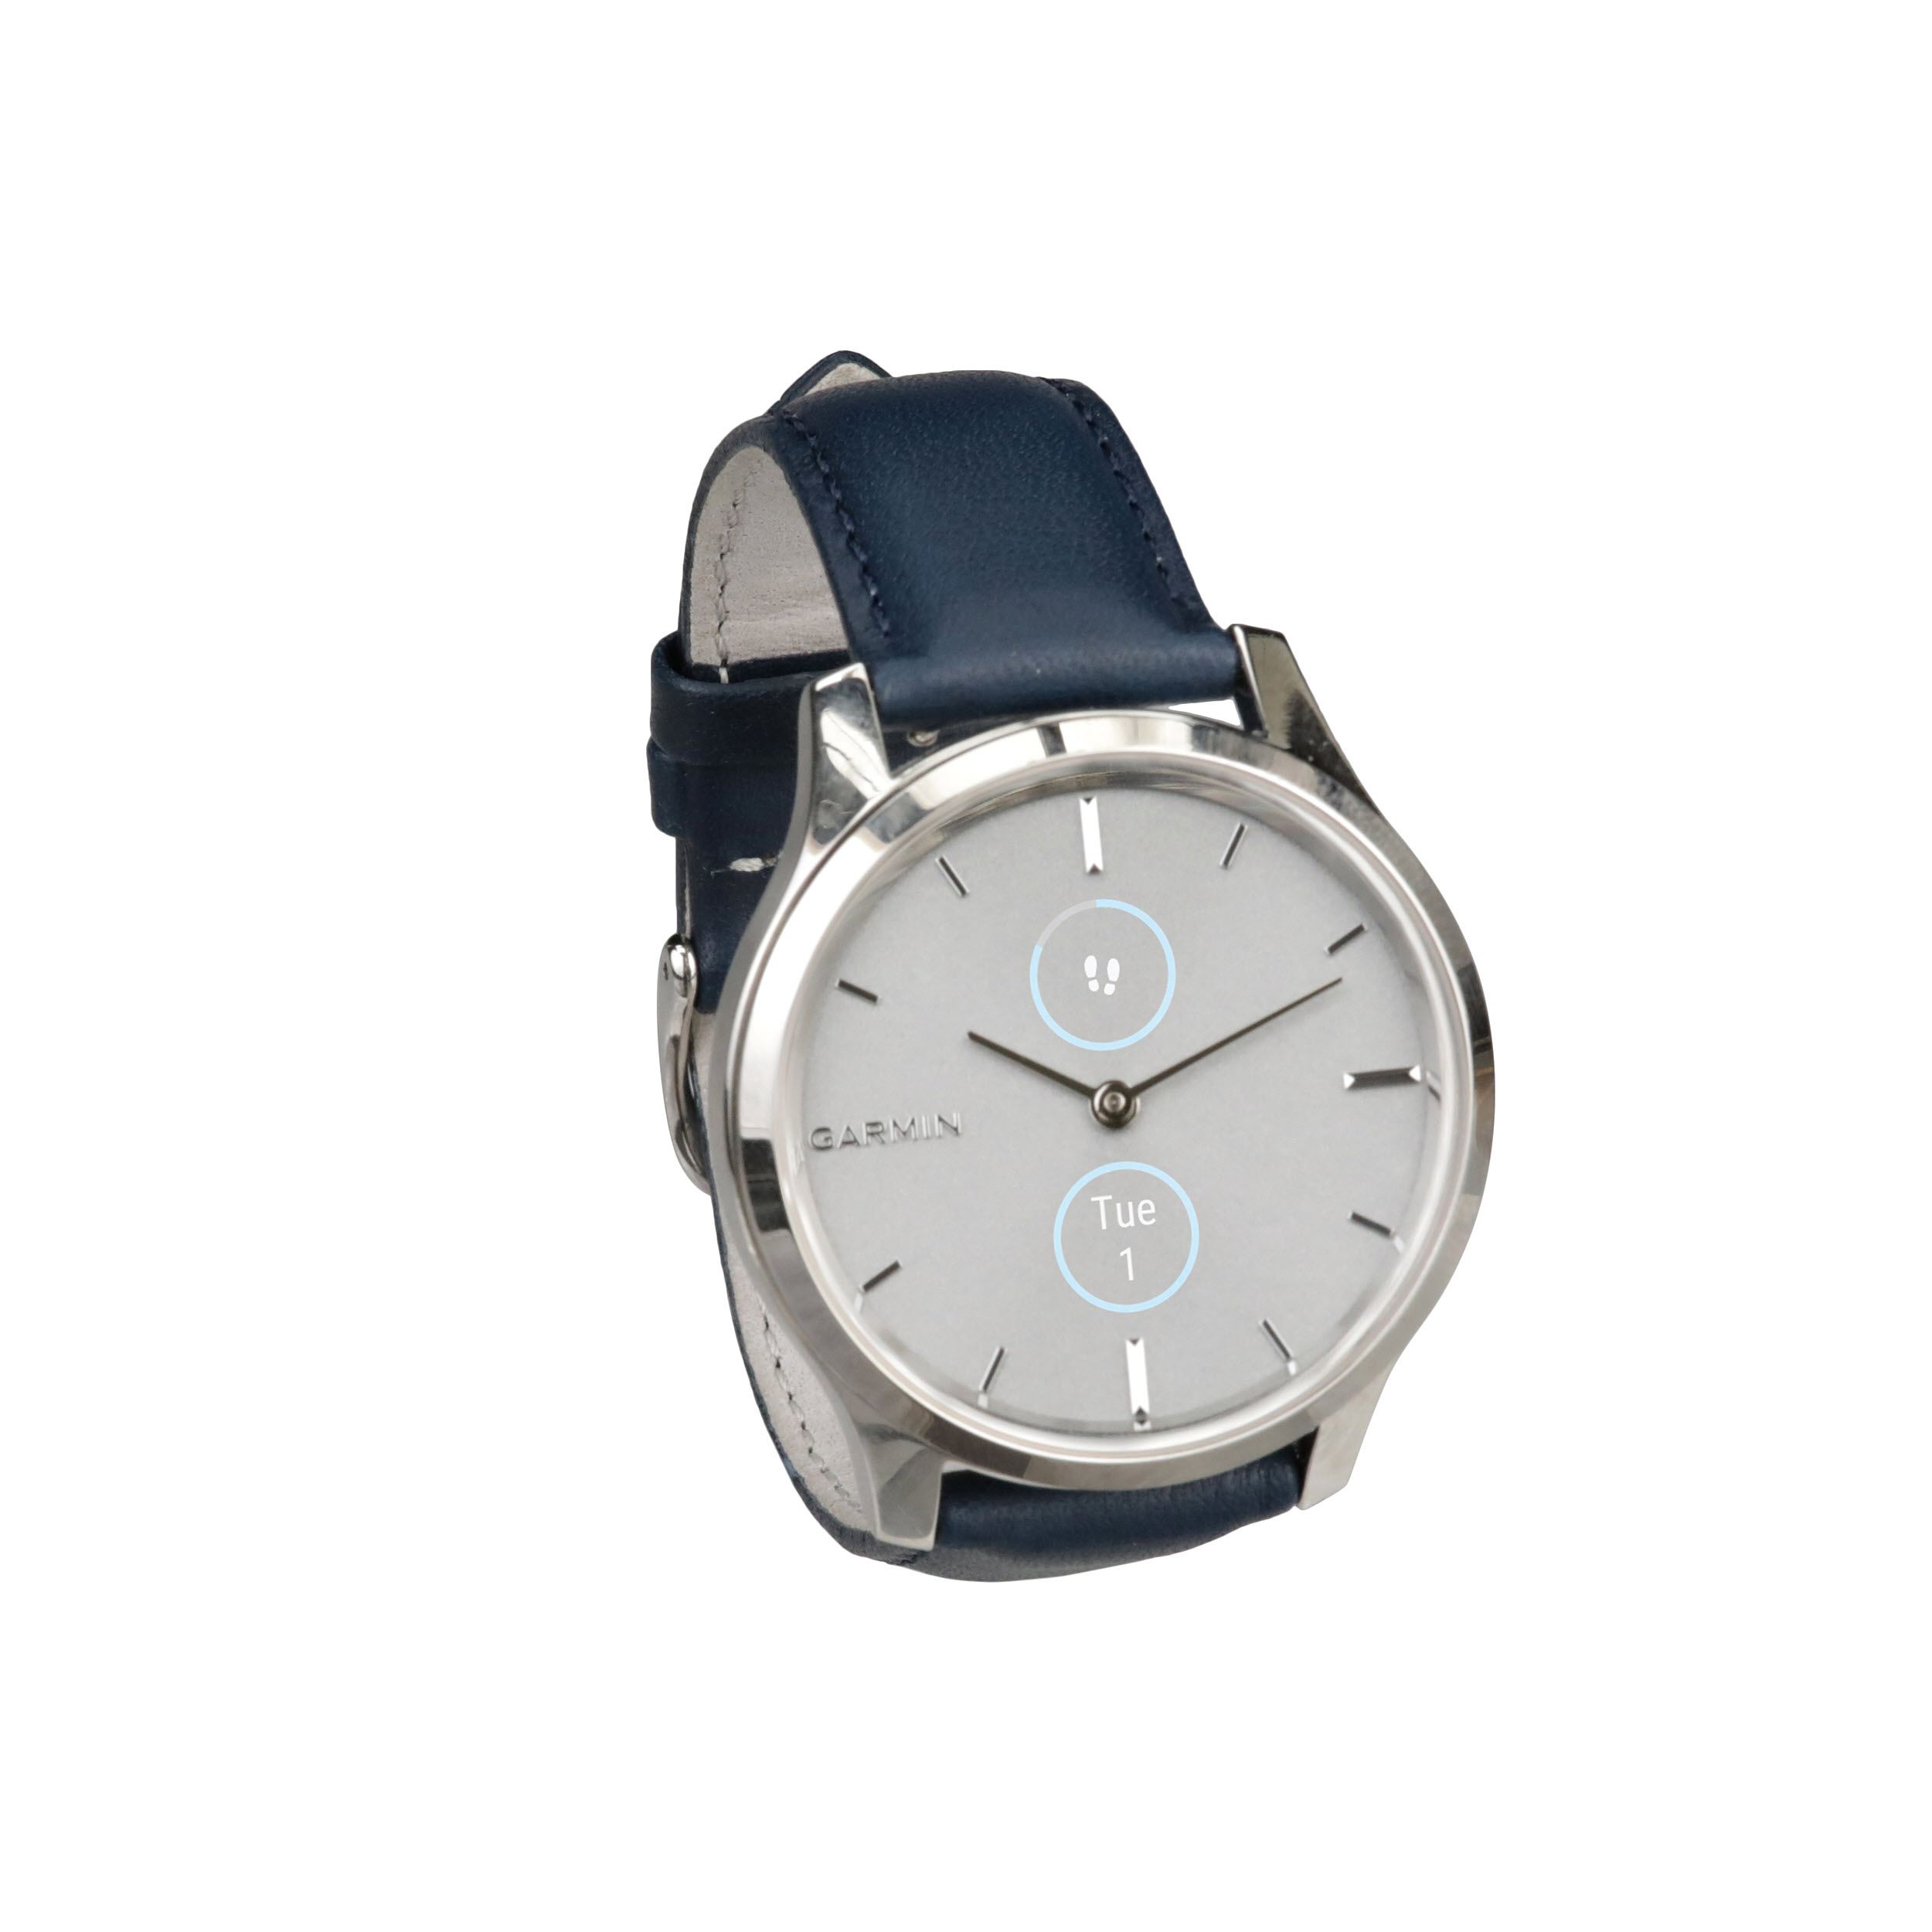 Garmin Vivomove® Smart Watch, Luxe Navy Leather with Silver 